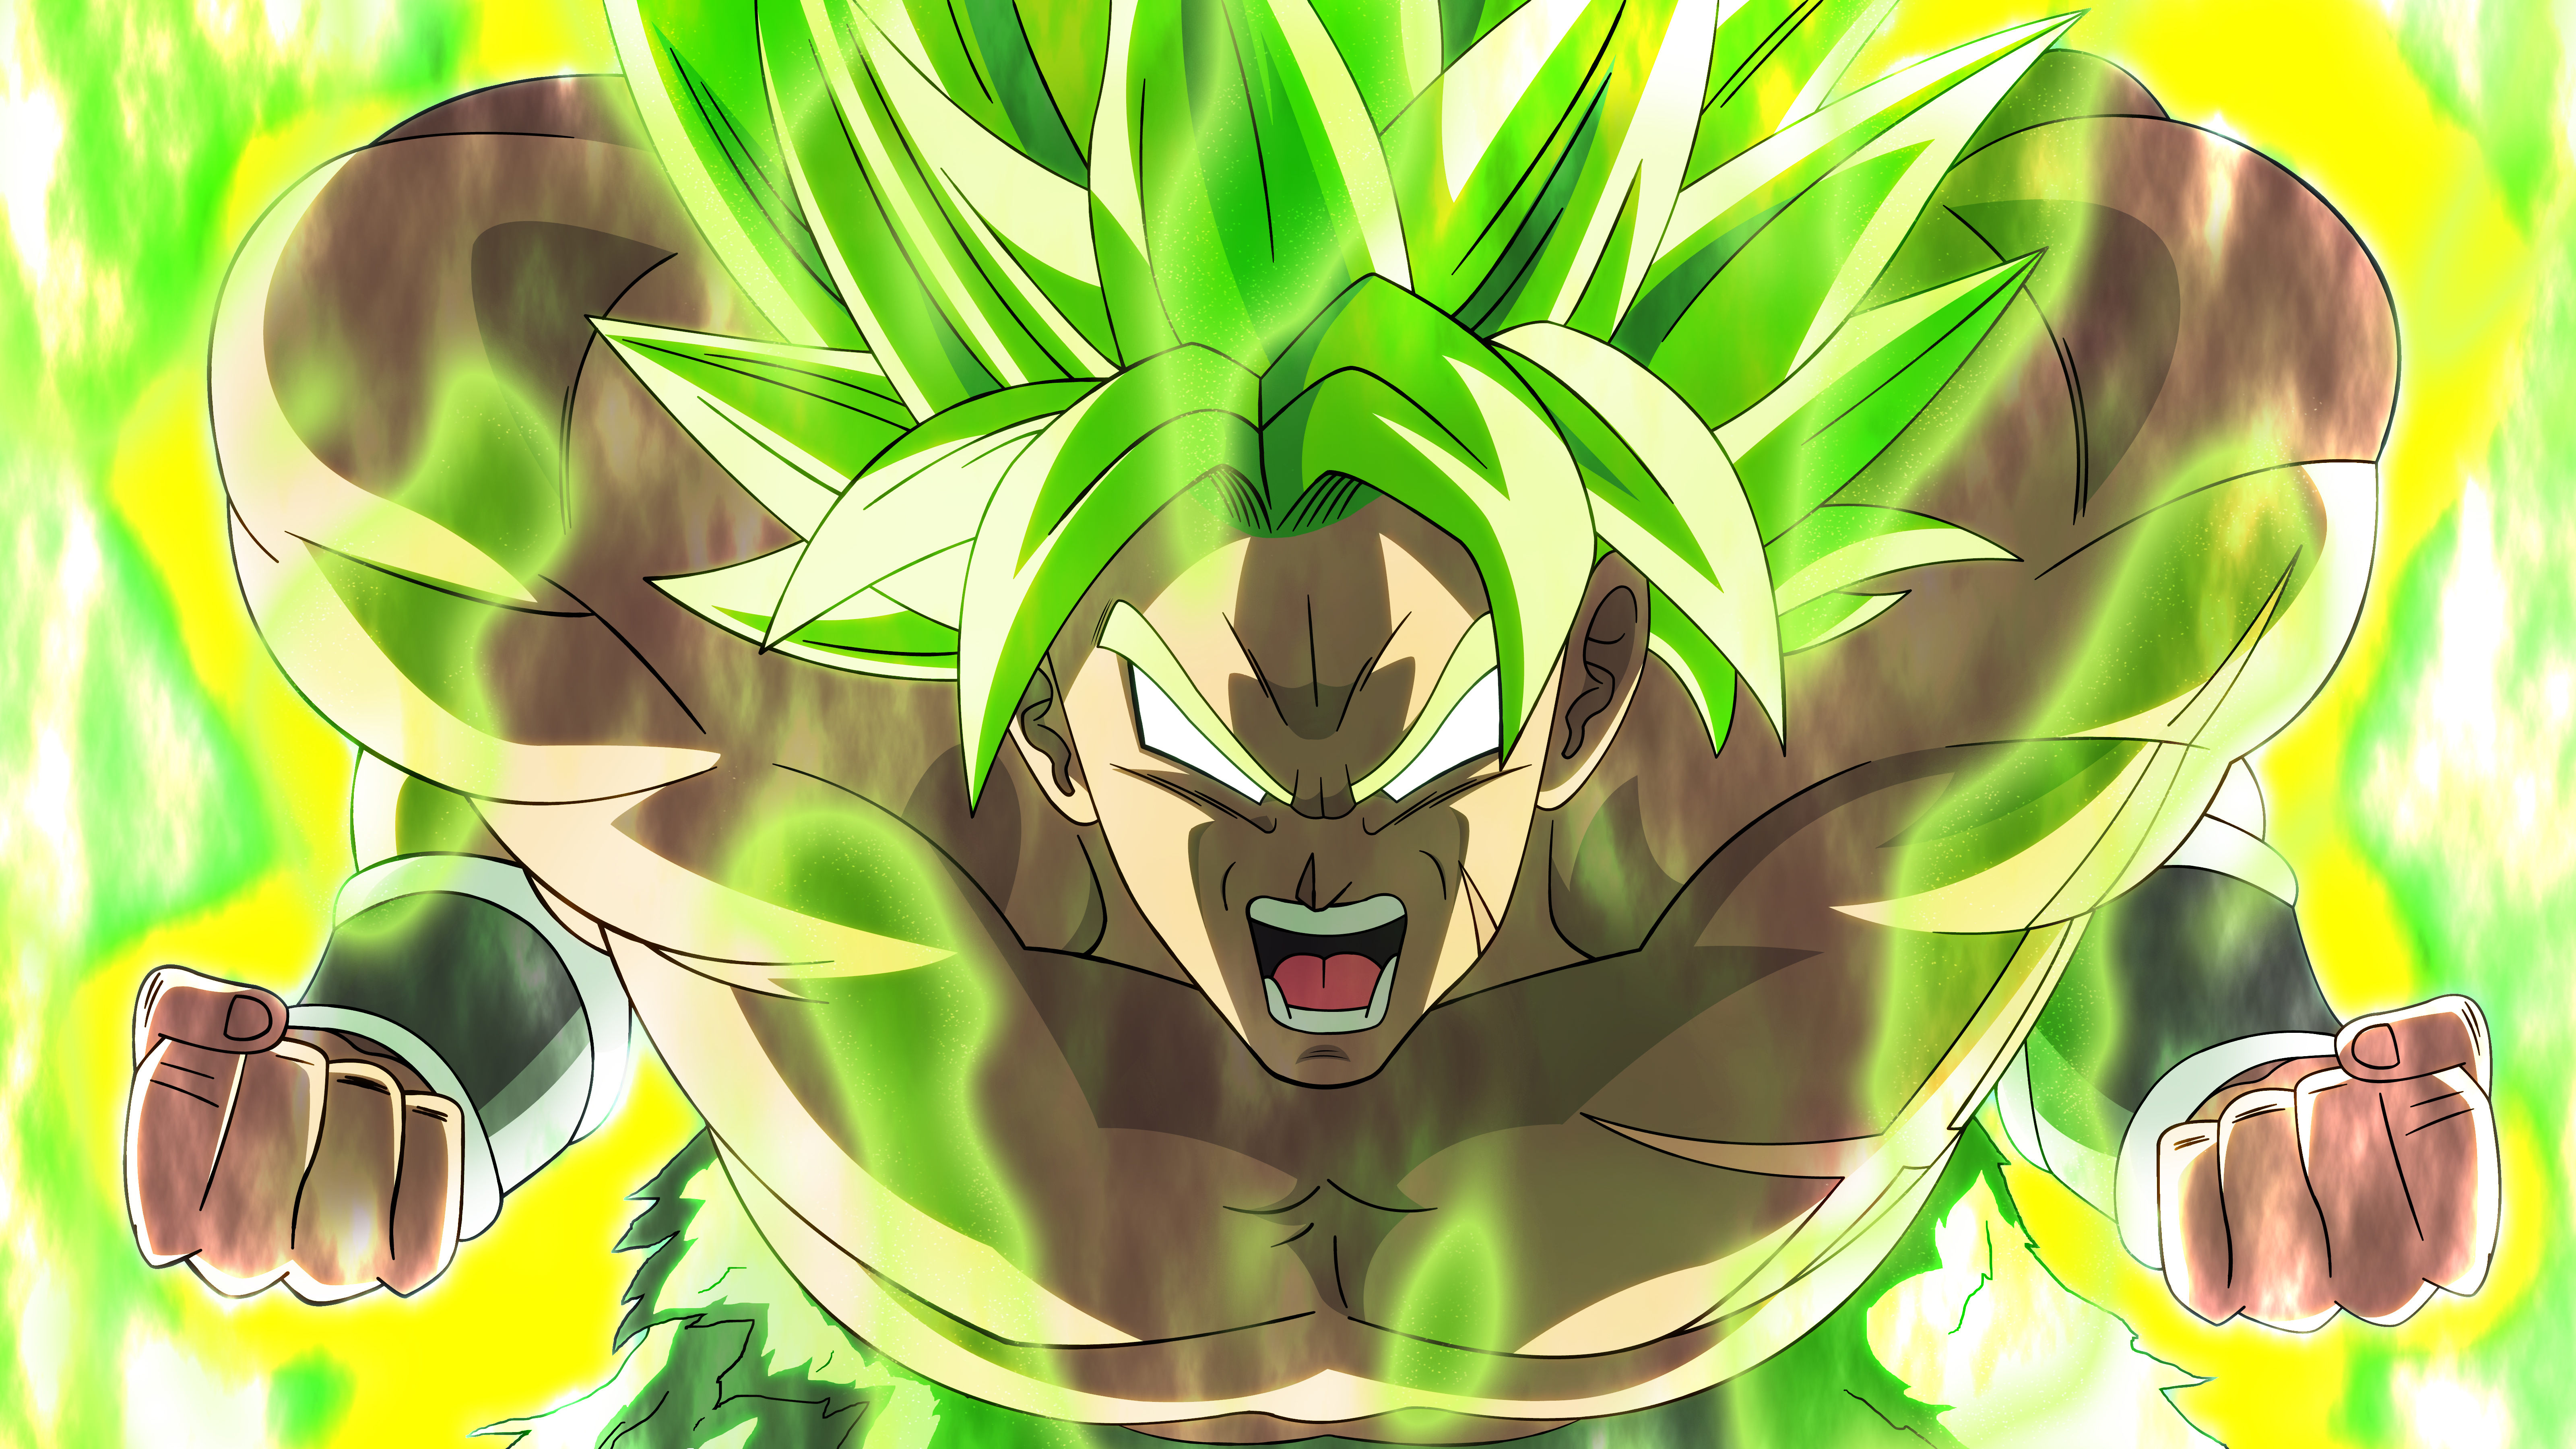 Broly rage by MohaSetif